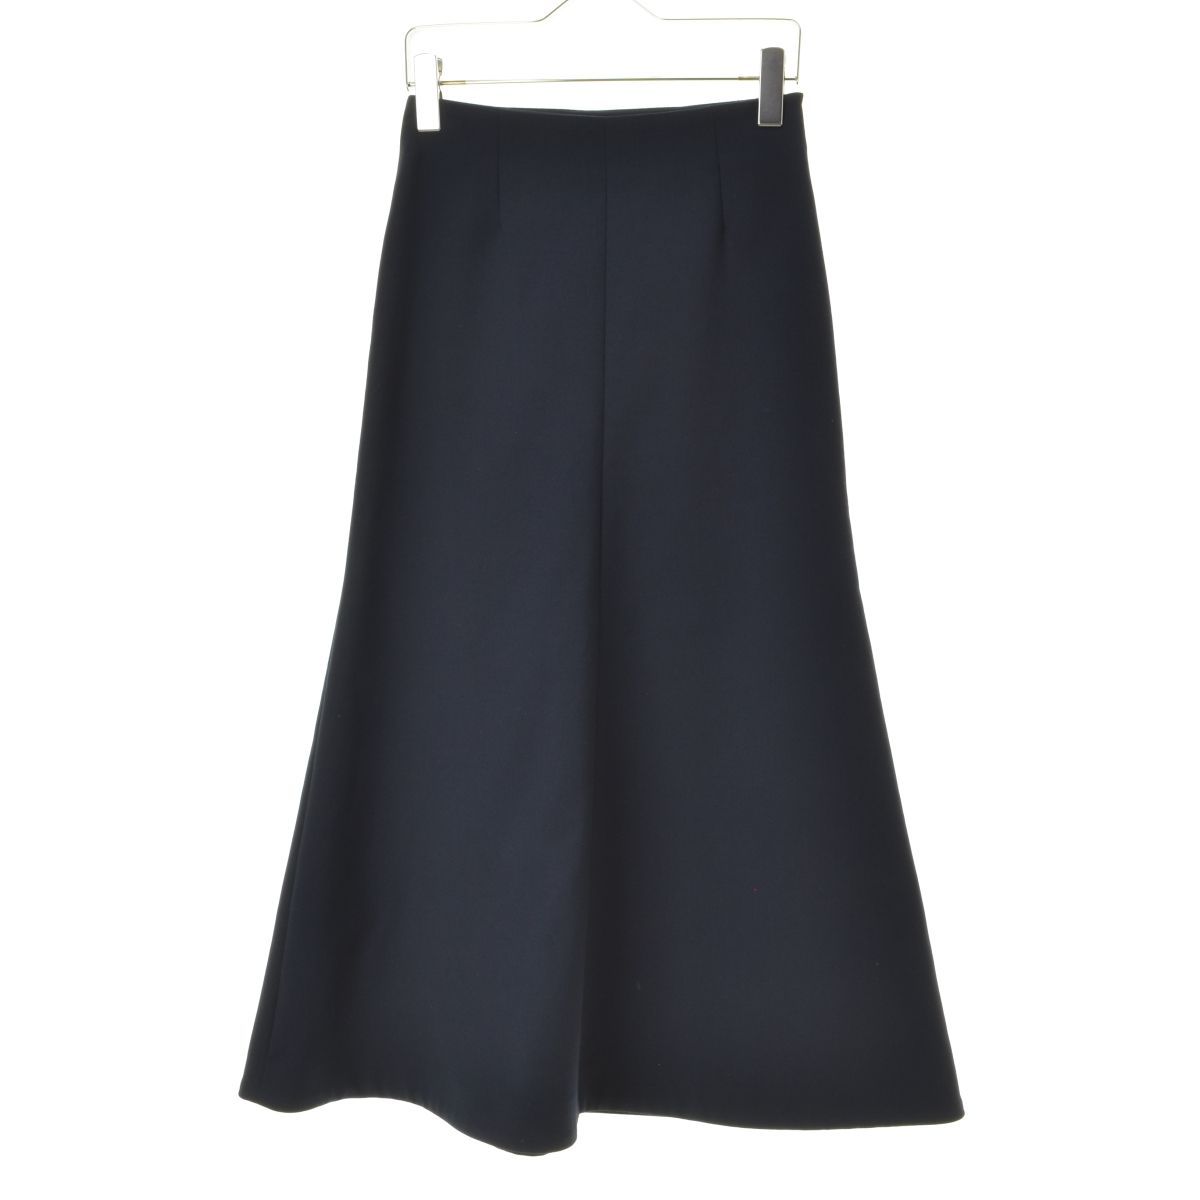 L'APPARTEMENT】Lisiere Punch Flare Skirt ポンチフレアスカート